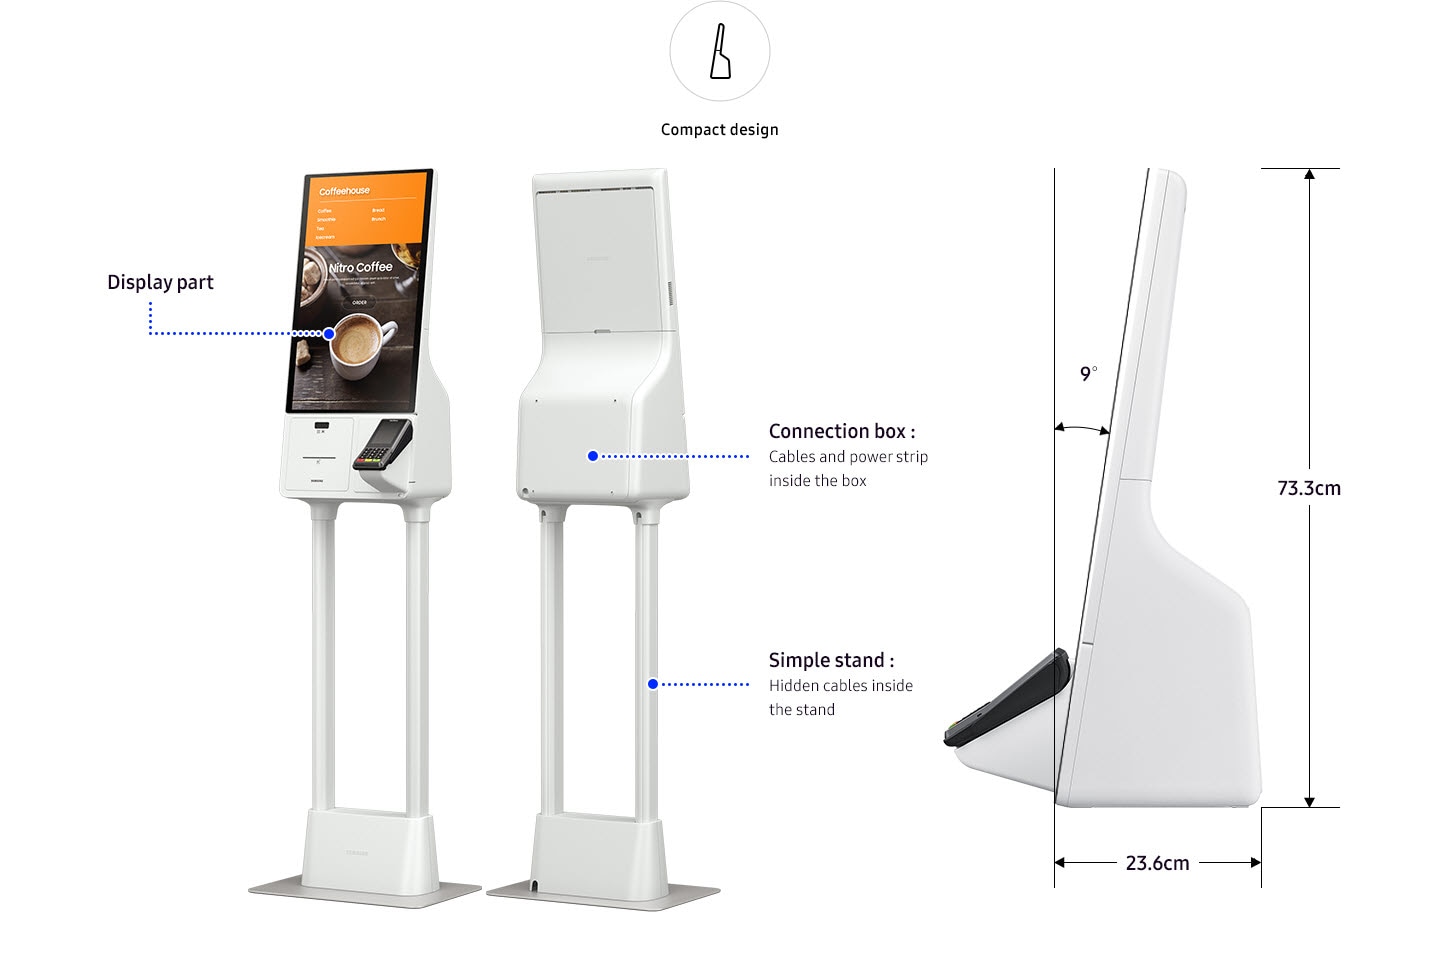 The Samsung Kiosk display, connect box and simple stand showcased, with its 9�  incline, 73.3 cm height and 23.6 cm width.